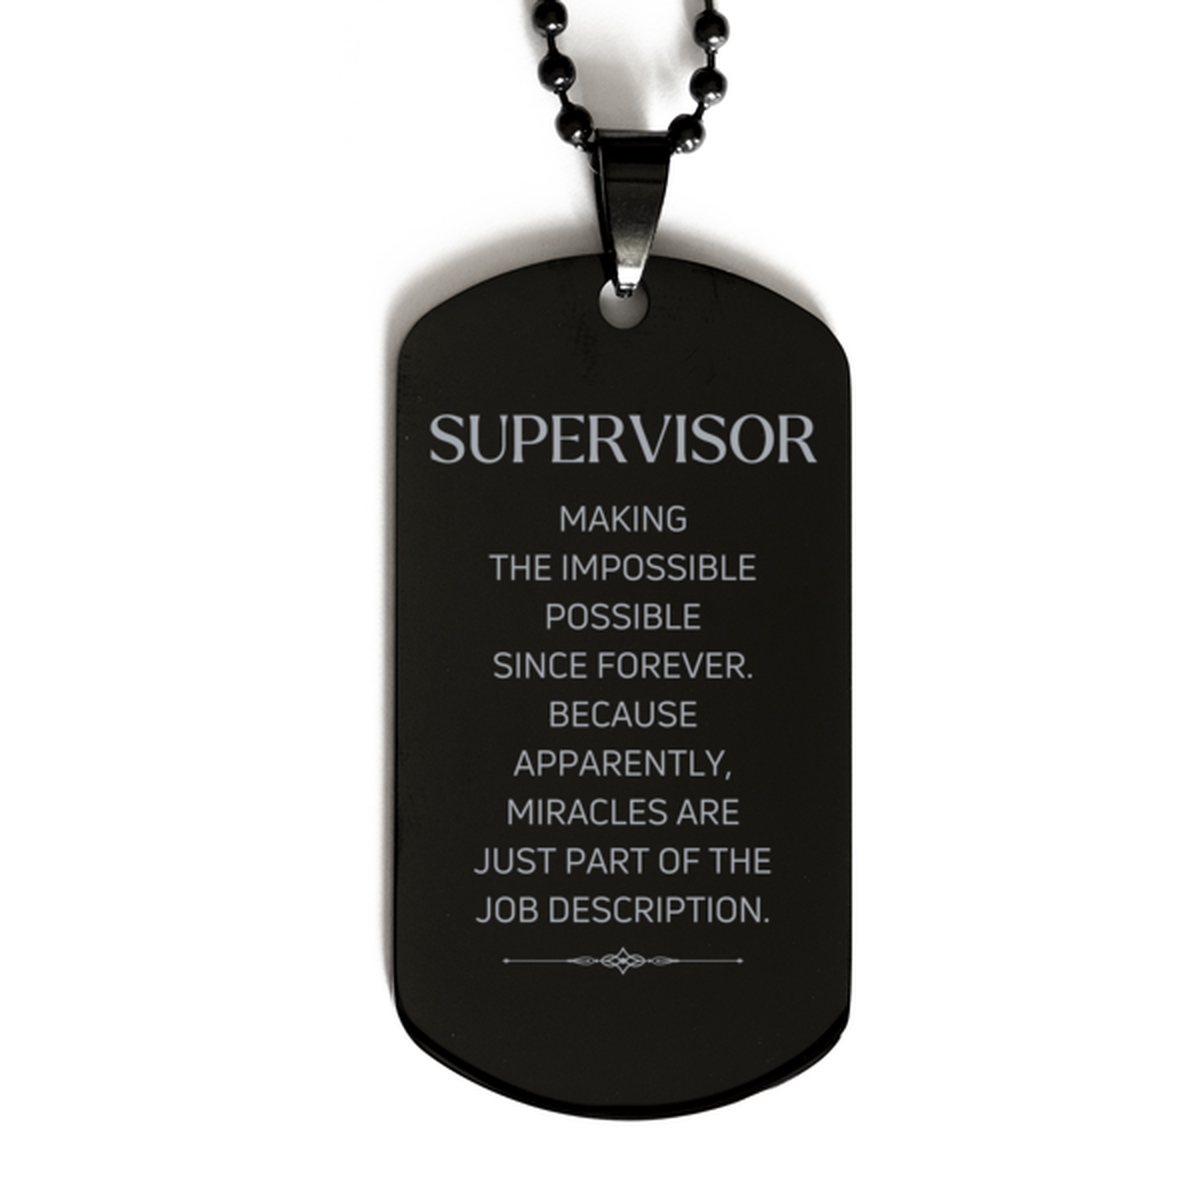 Funny Supervisor Gifts, Miracles are just part of the job description, Inspirational Birthday Black Dog Tag For Supervisor, Men, Women, Coworkers, Friends, Boss